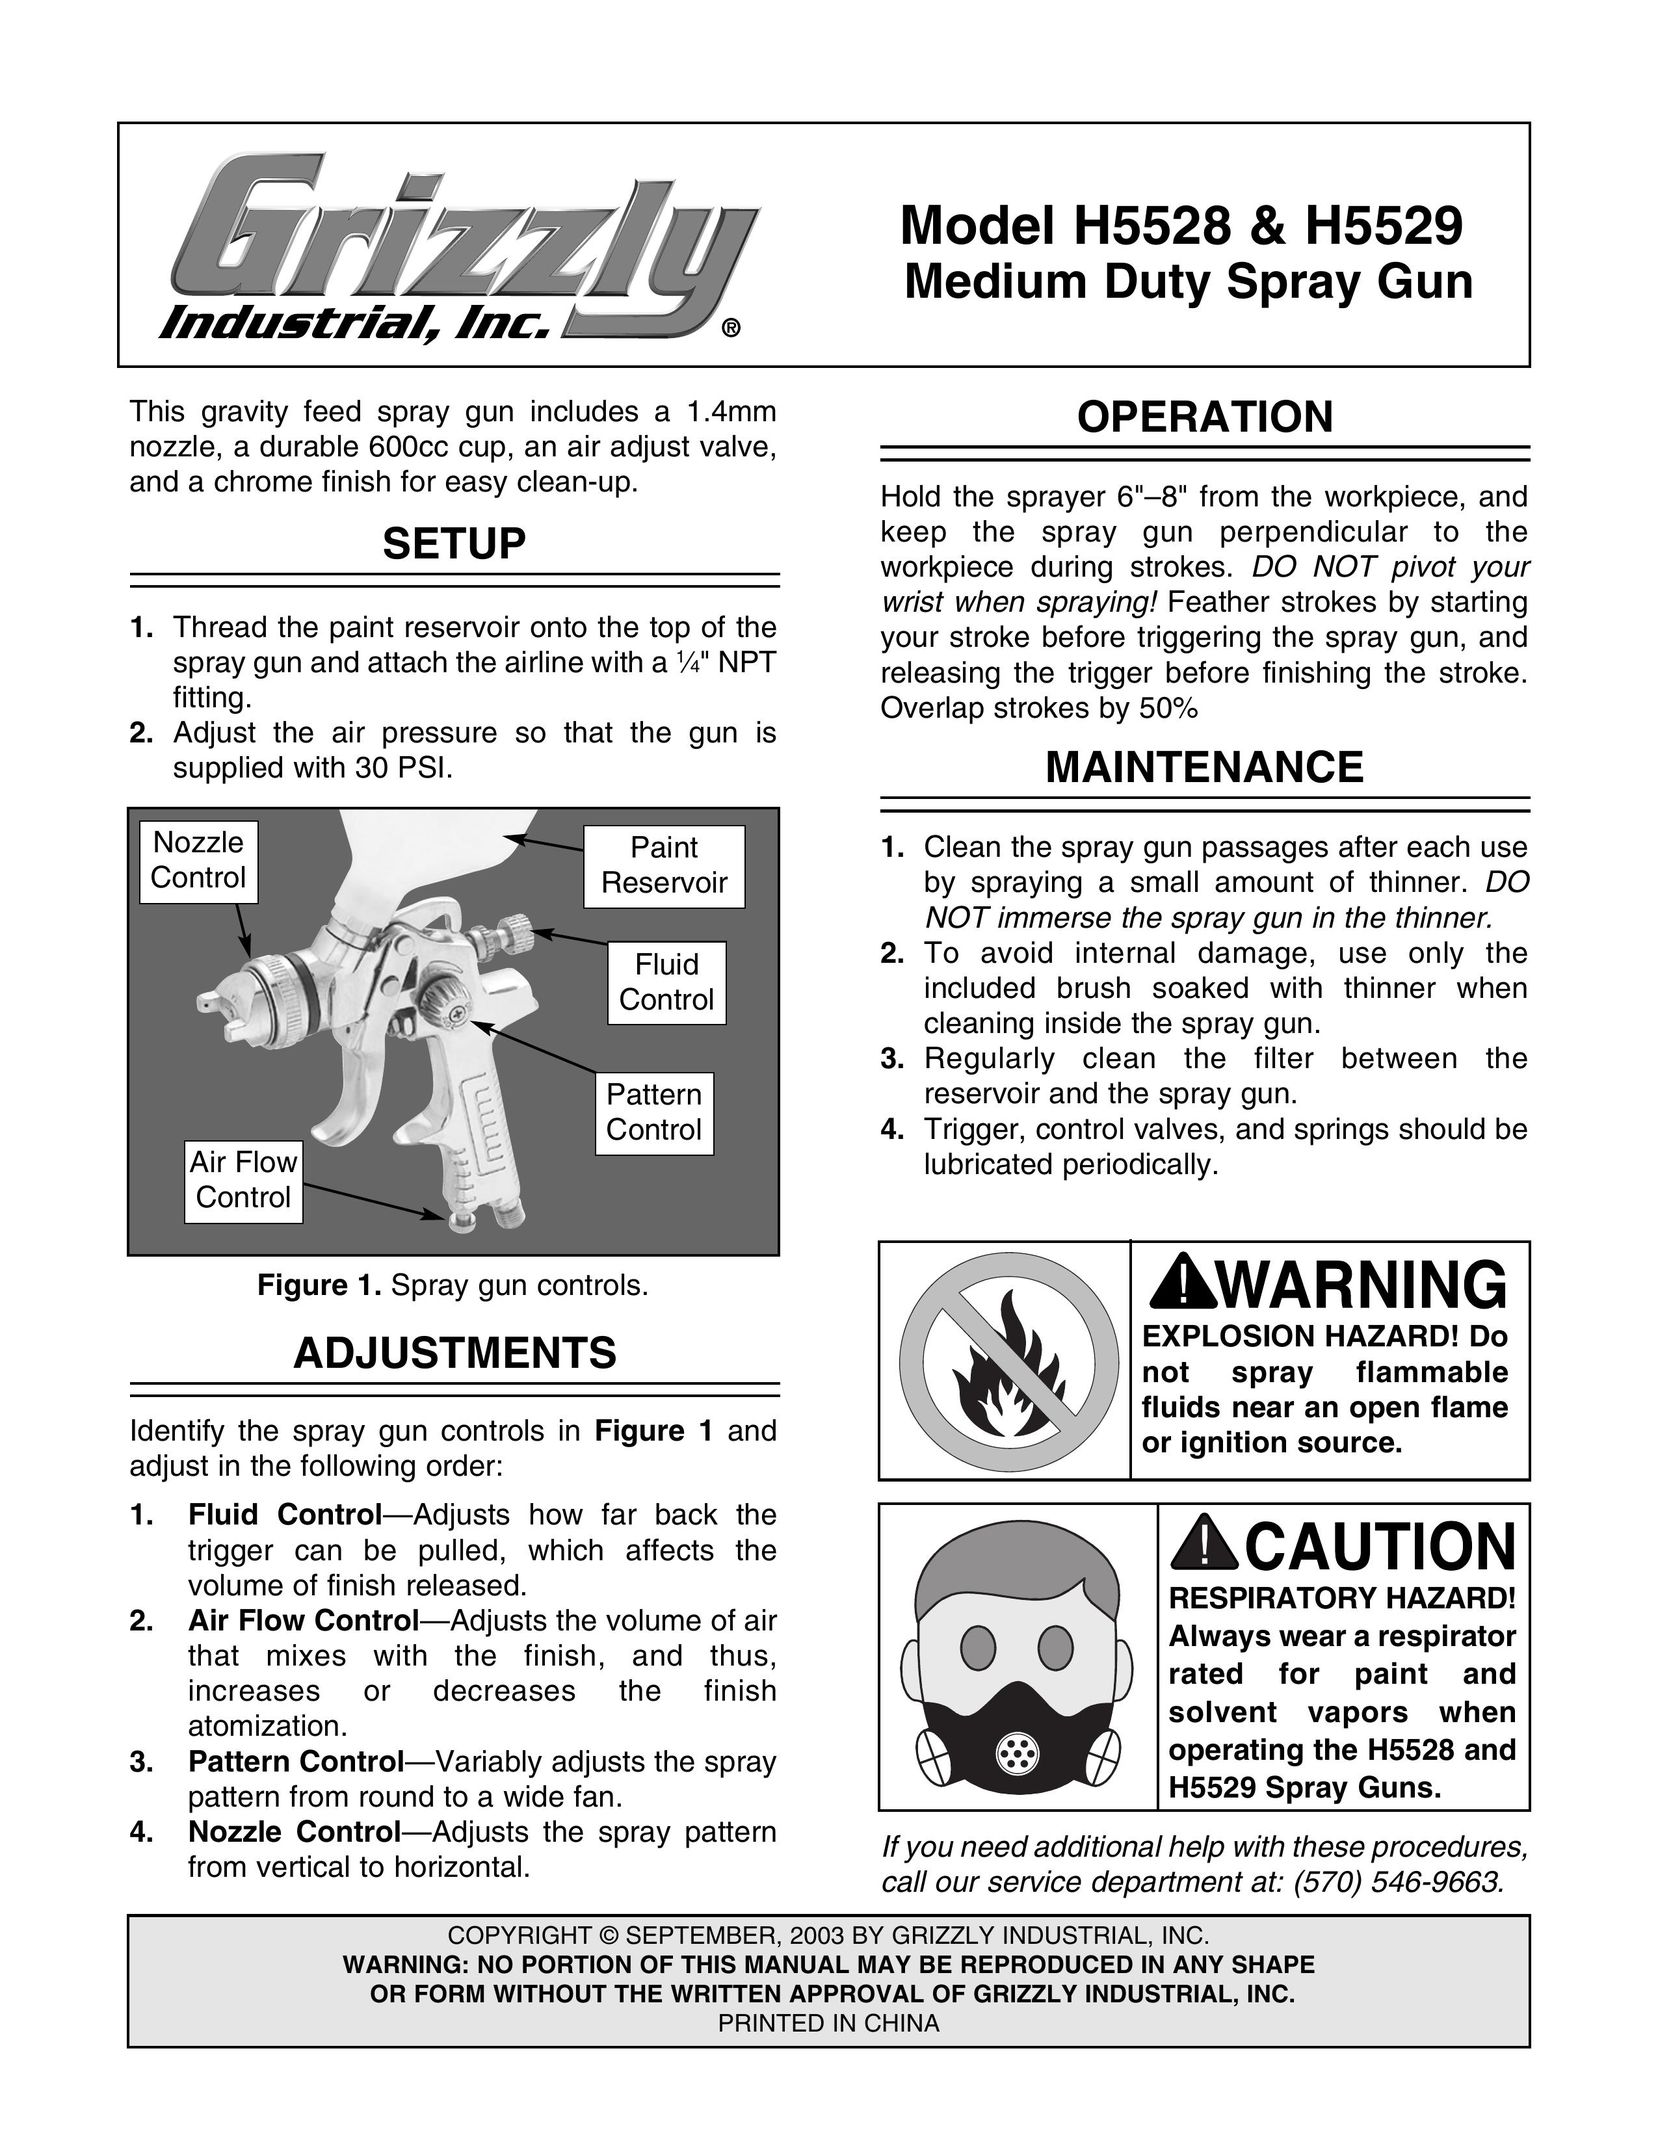 Grizzly H5528 Paint Sprayer User Manual